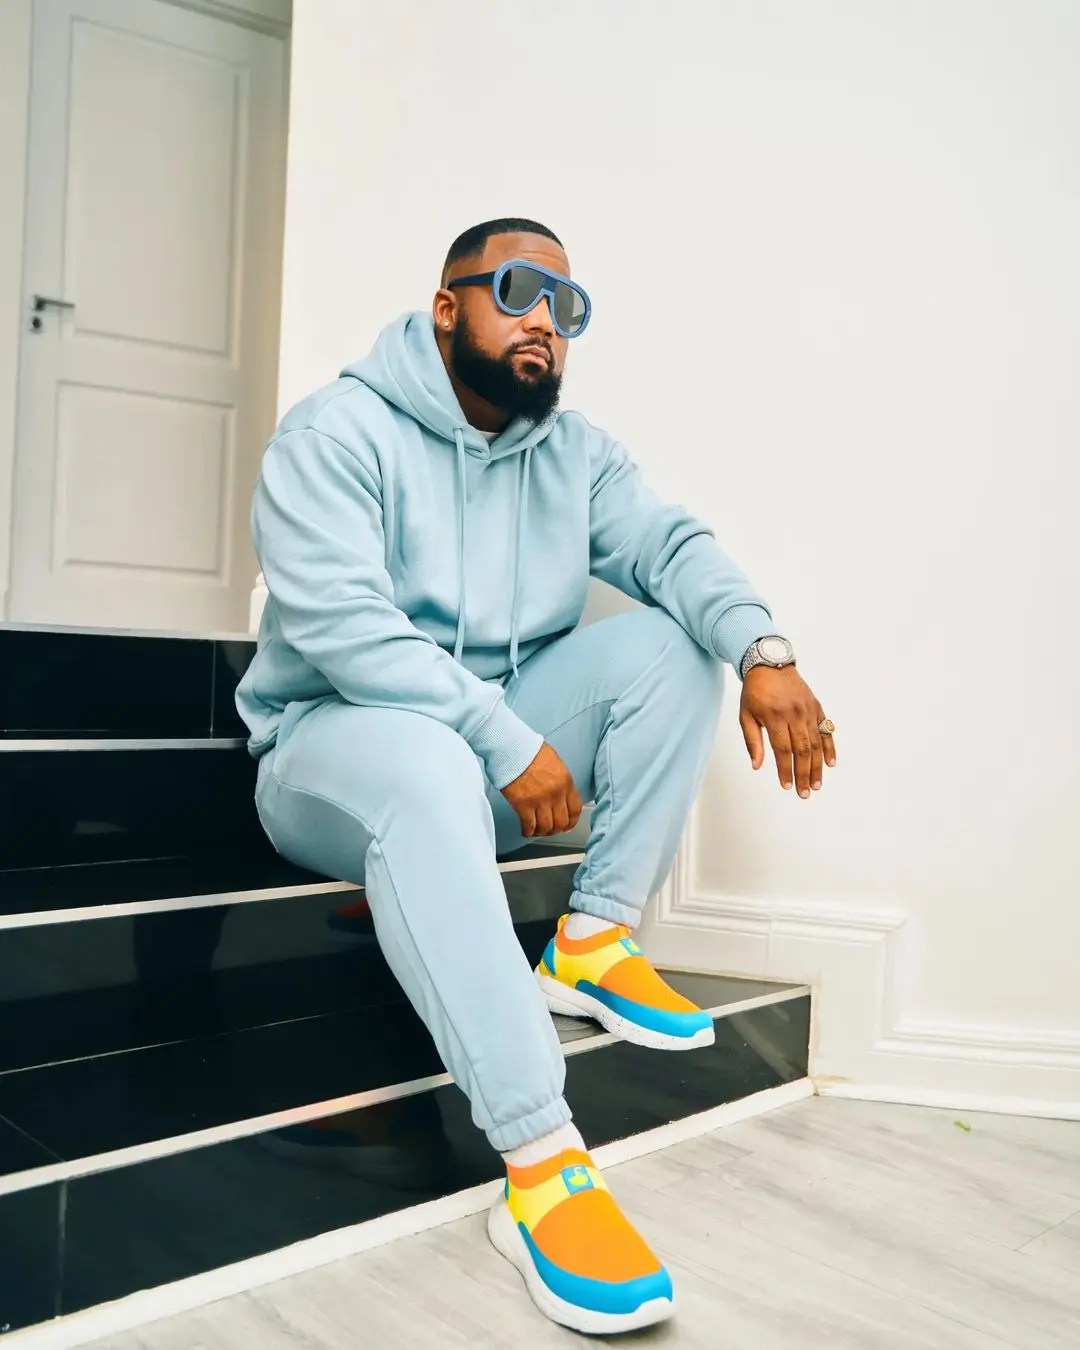 Cassper Nyovest replies to a fan asking if he gets paid for the matches